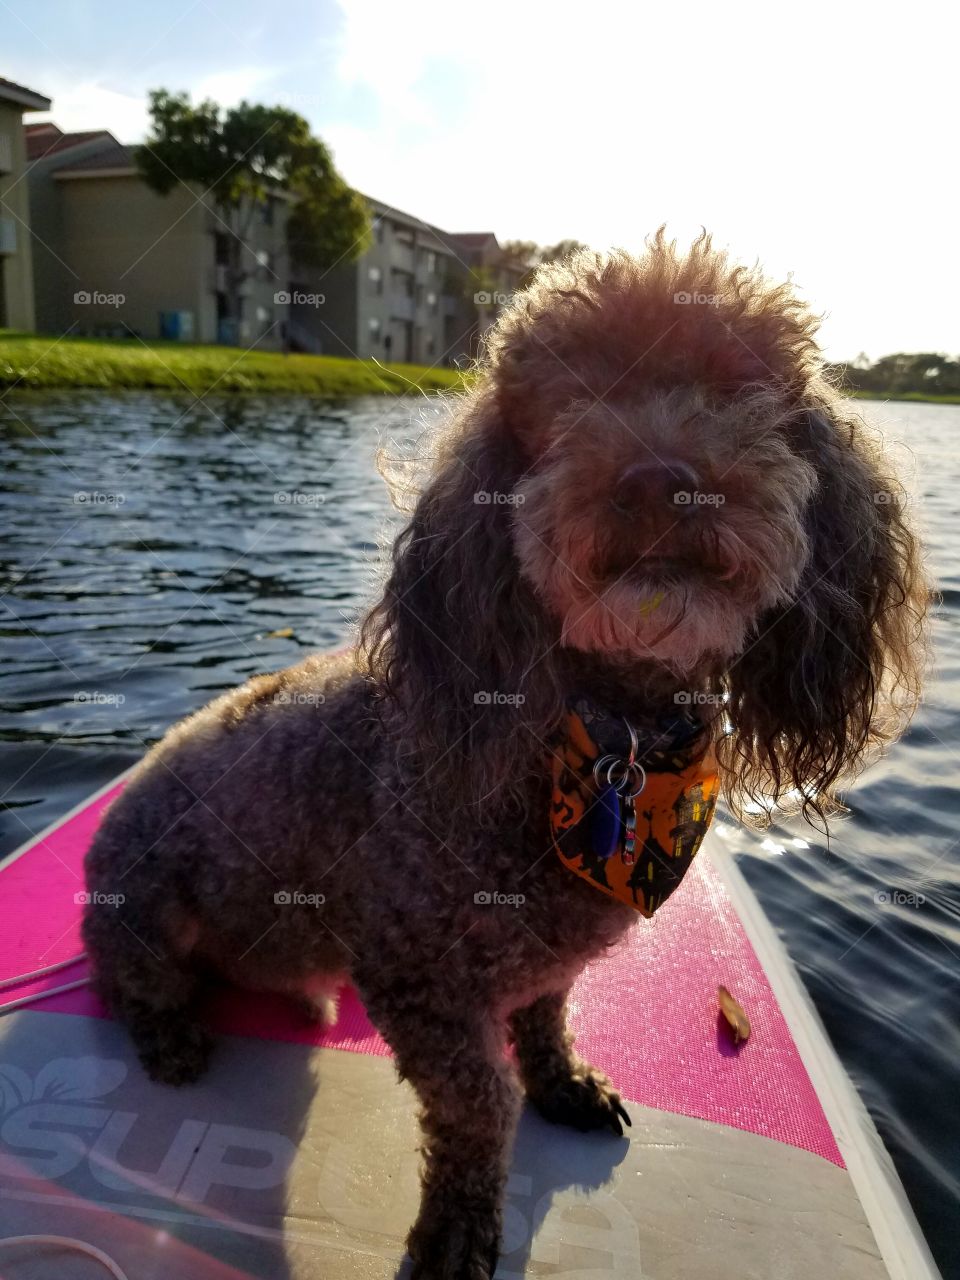 Best First Mate - My dog enjoys paddleboarding and if I dare get on the board without him, he'll cry.